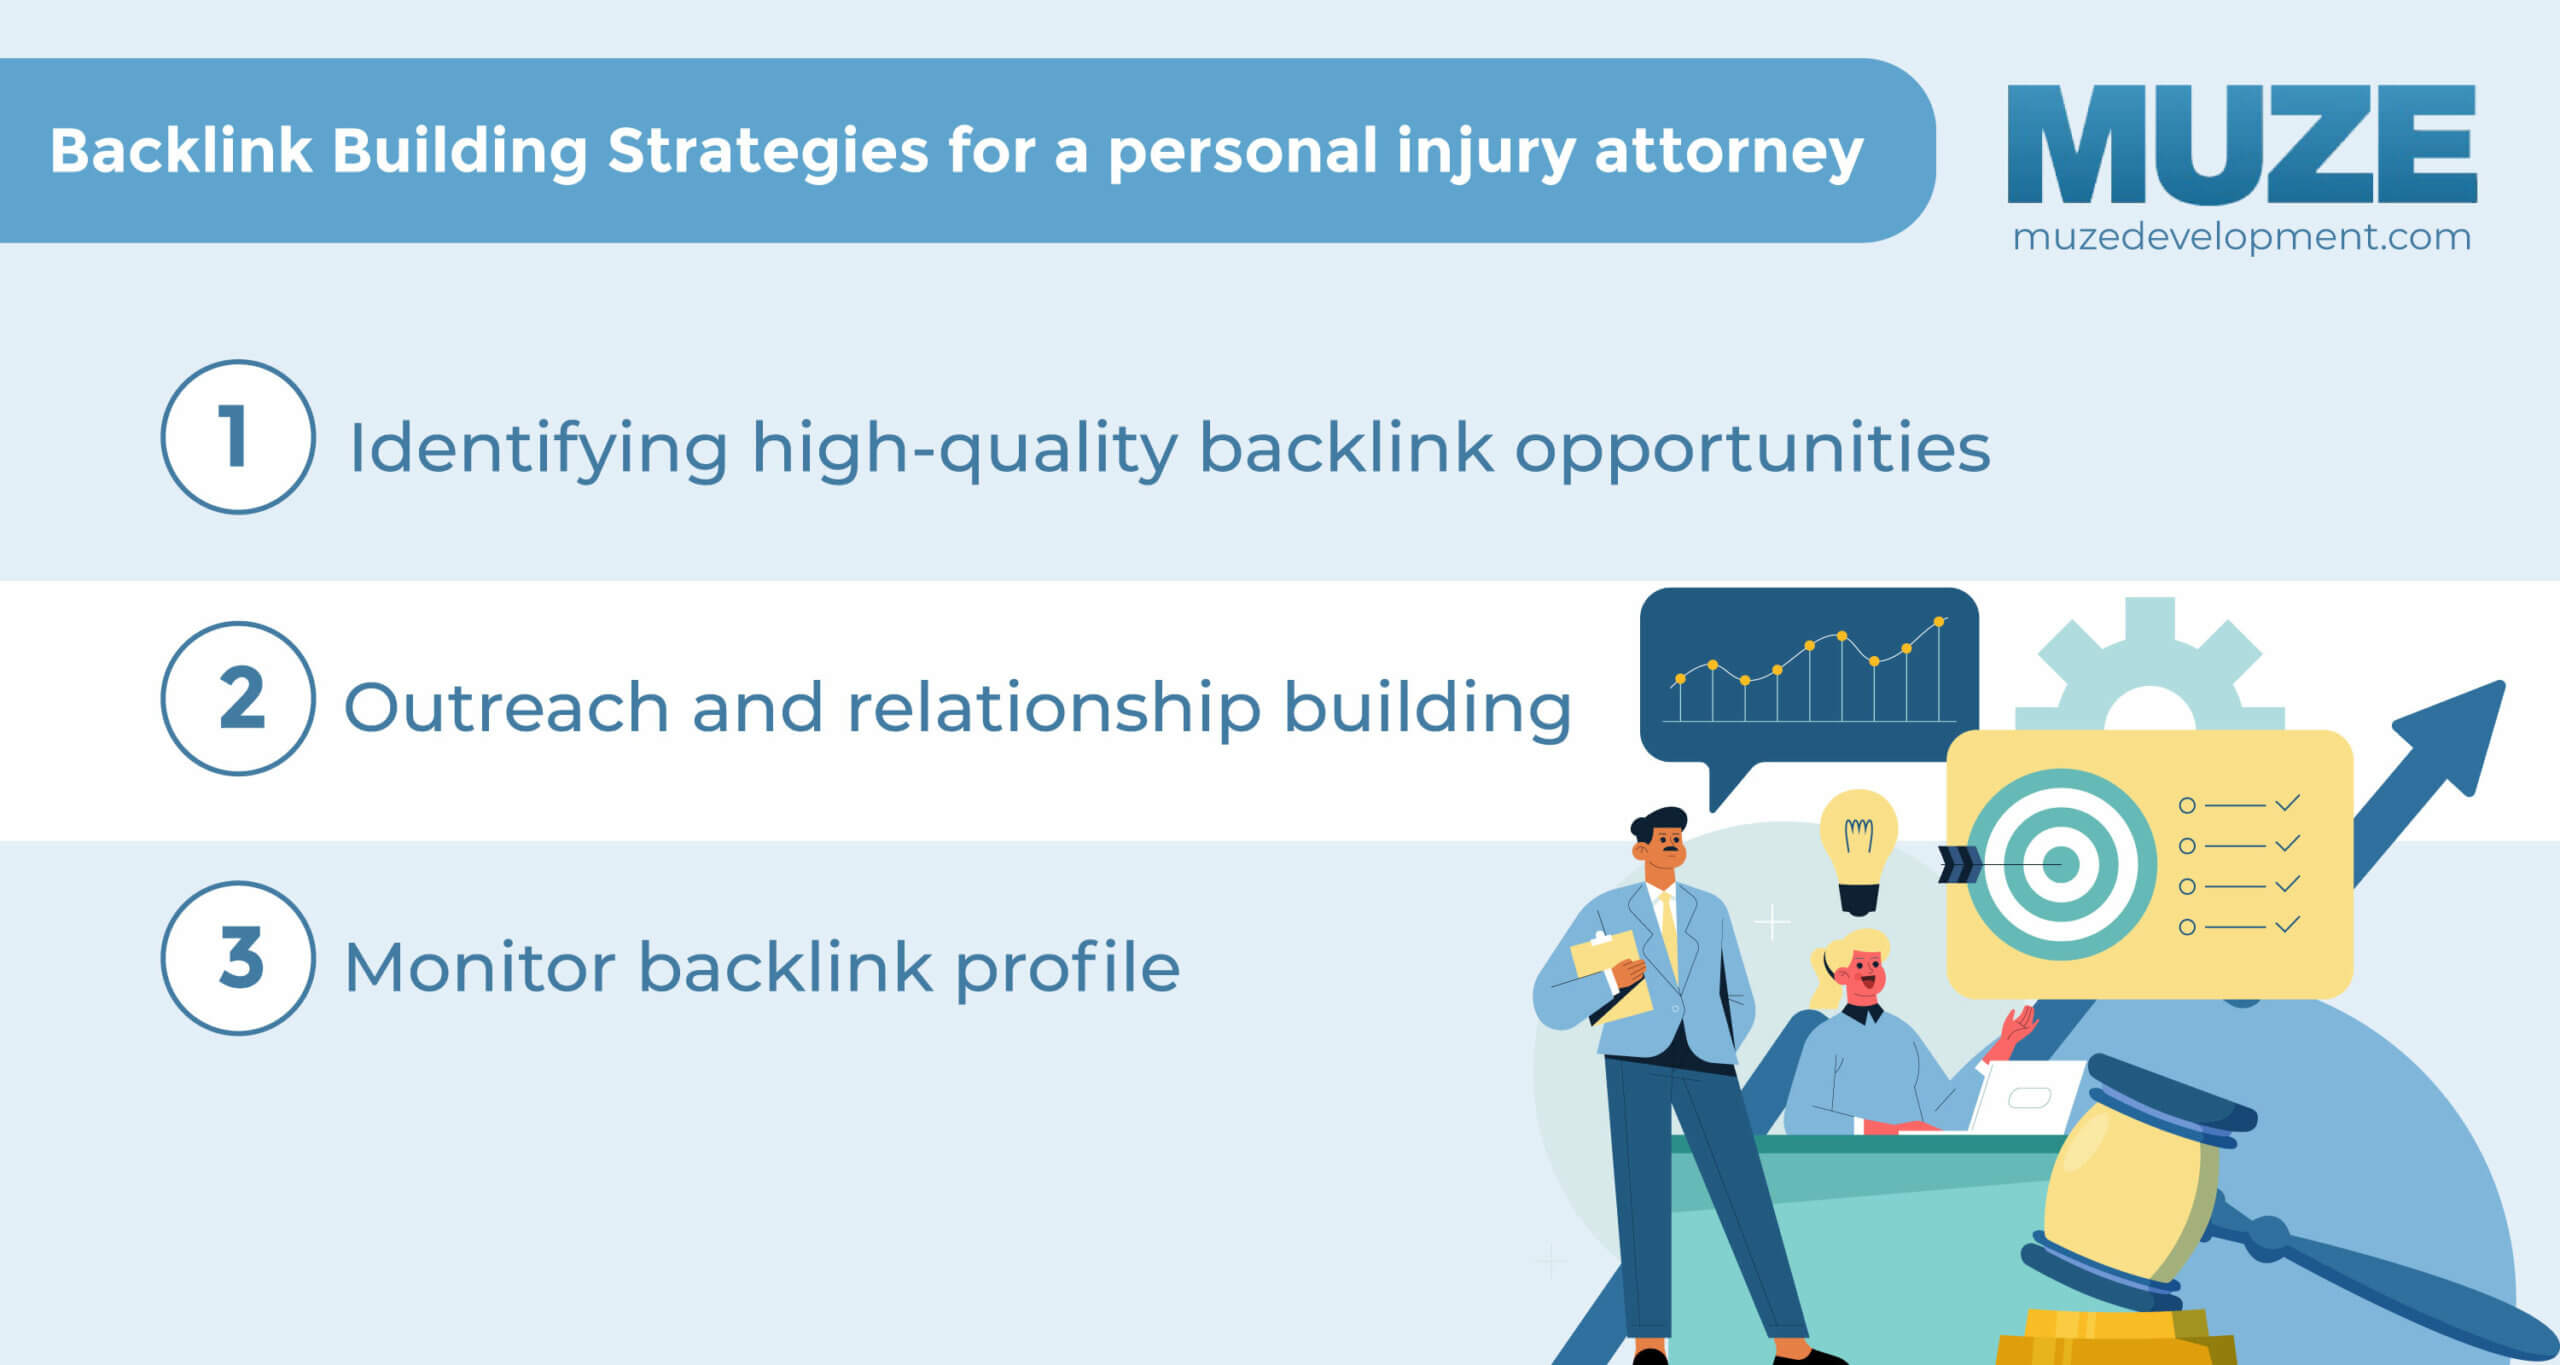 Backlink Building Strategies for a personal injury attorney